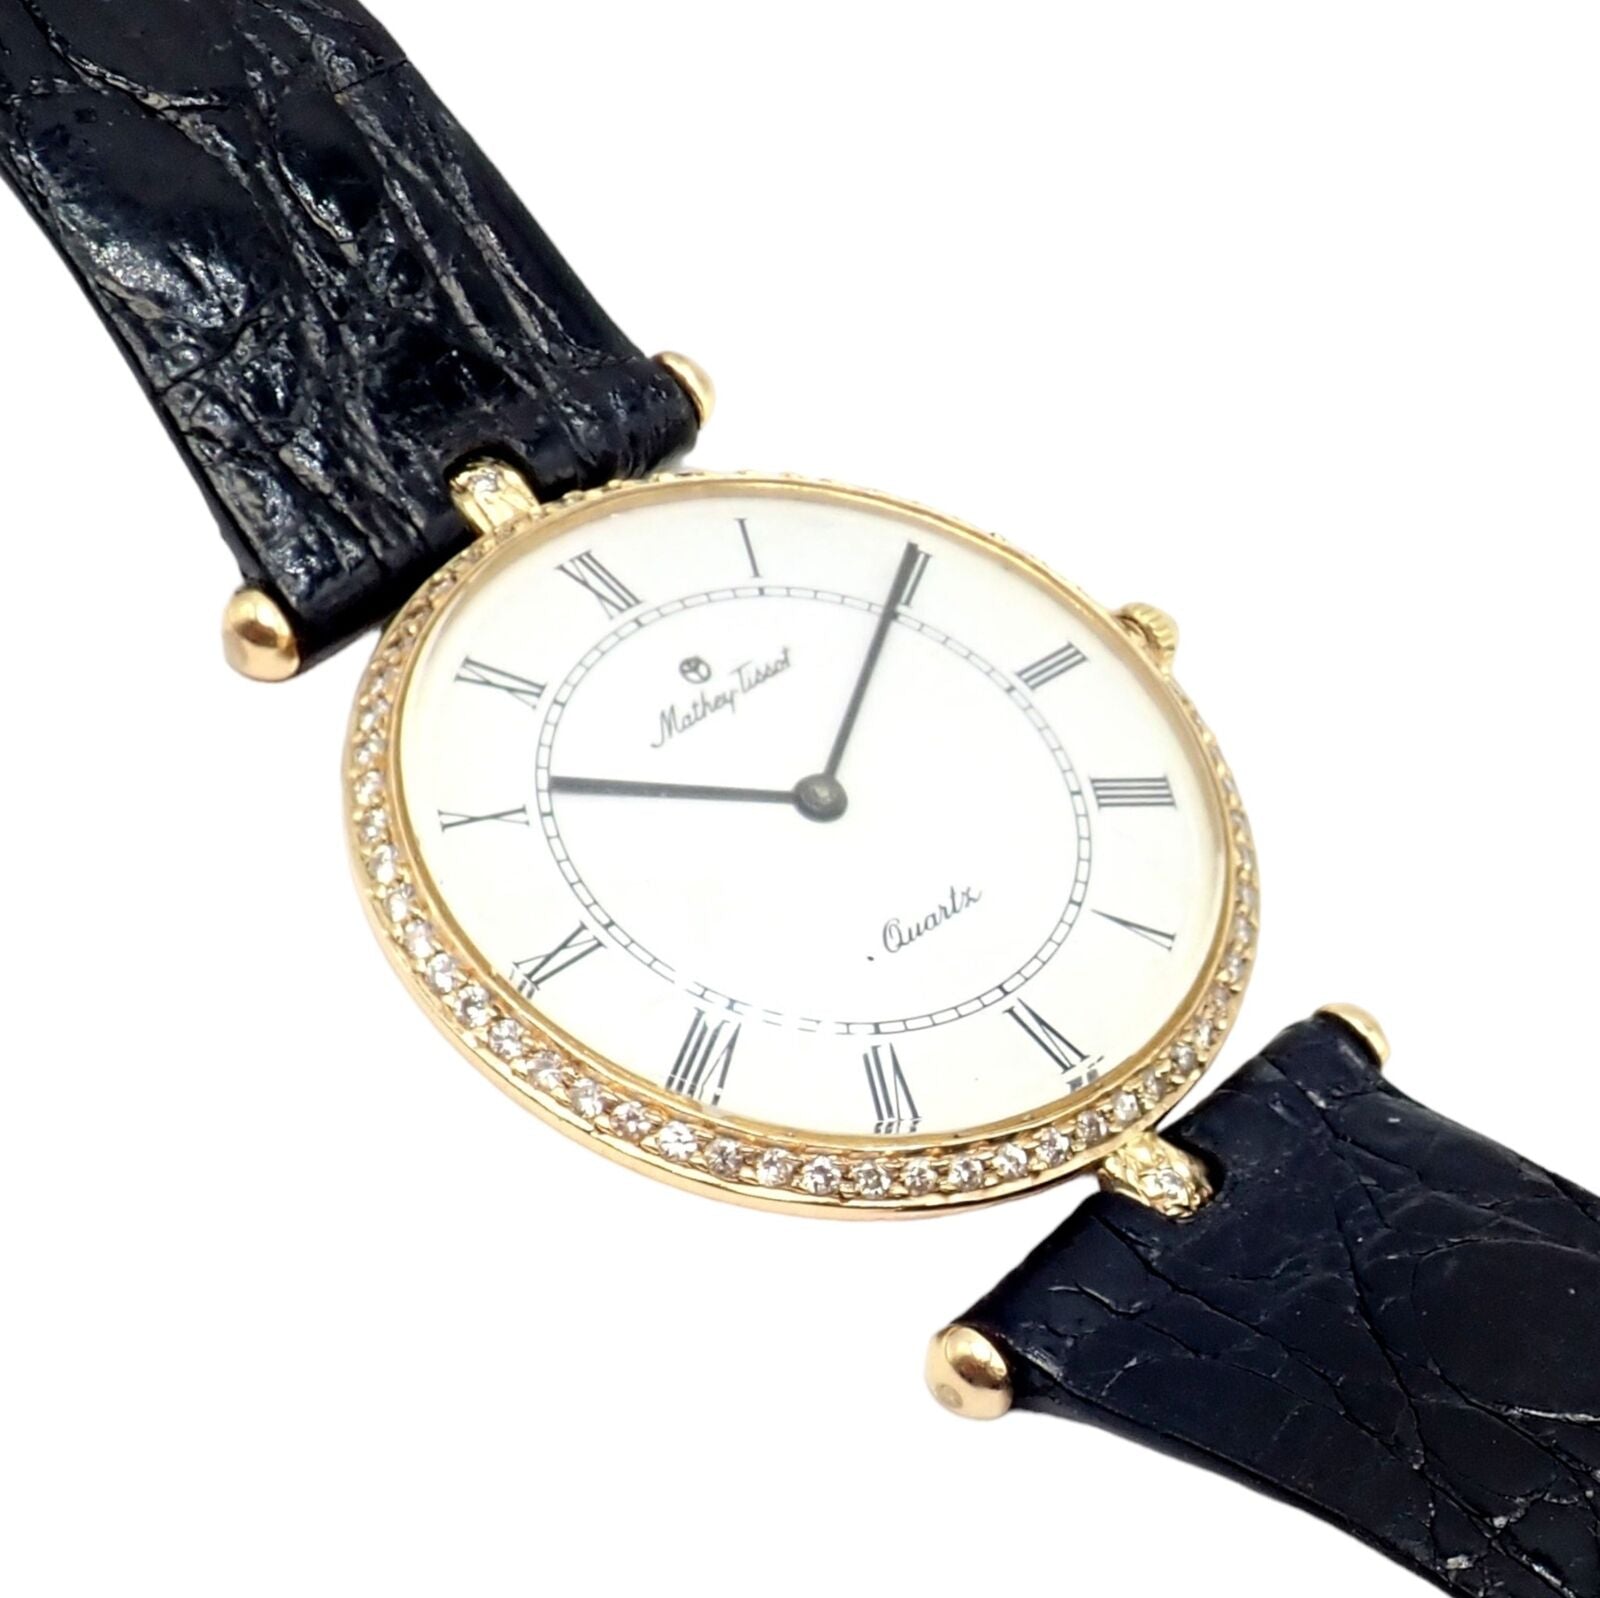 Tissot Jewelry & Watches:Watches, Parts & Accessories:Watches:Wristwatches Authentic Mathey Tissot 14k Gold Diamond Movado Quartz Ladies Ultra Thin Watch